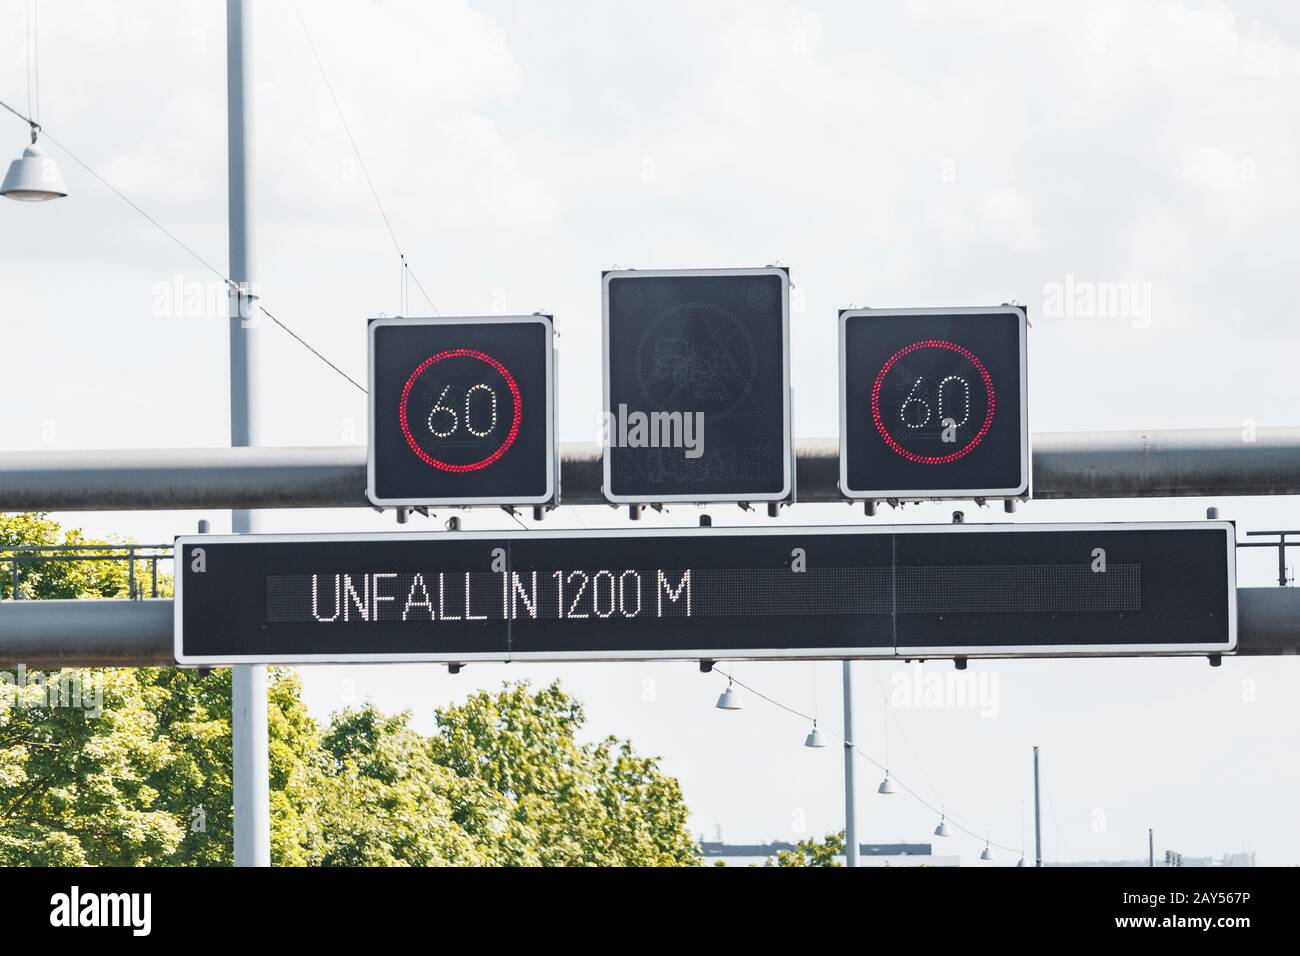 Electronic information display with speed limit warns about emergency situation ahead on a highway in Germany Stock Photo